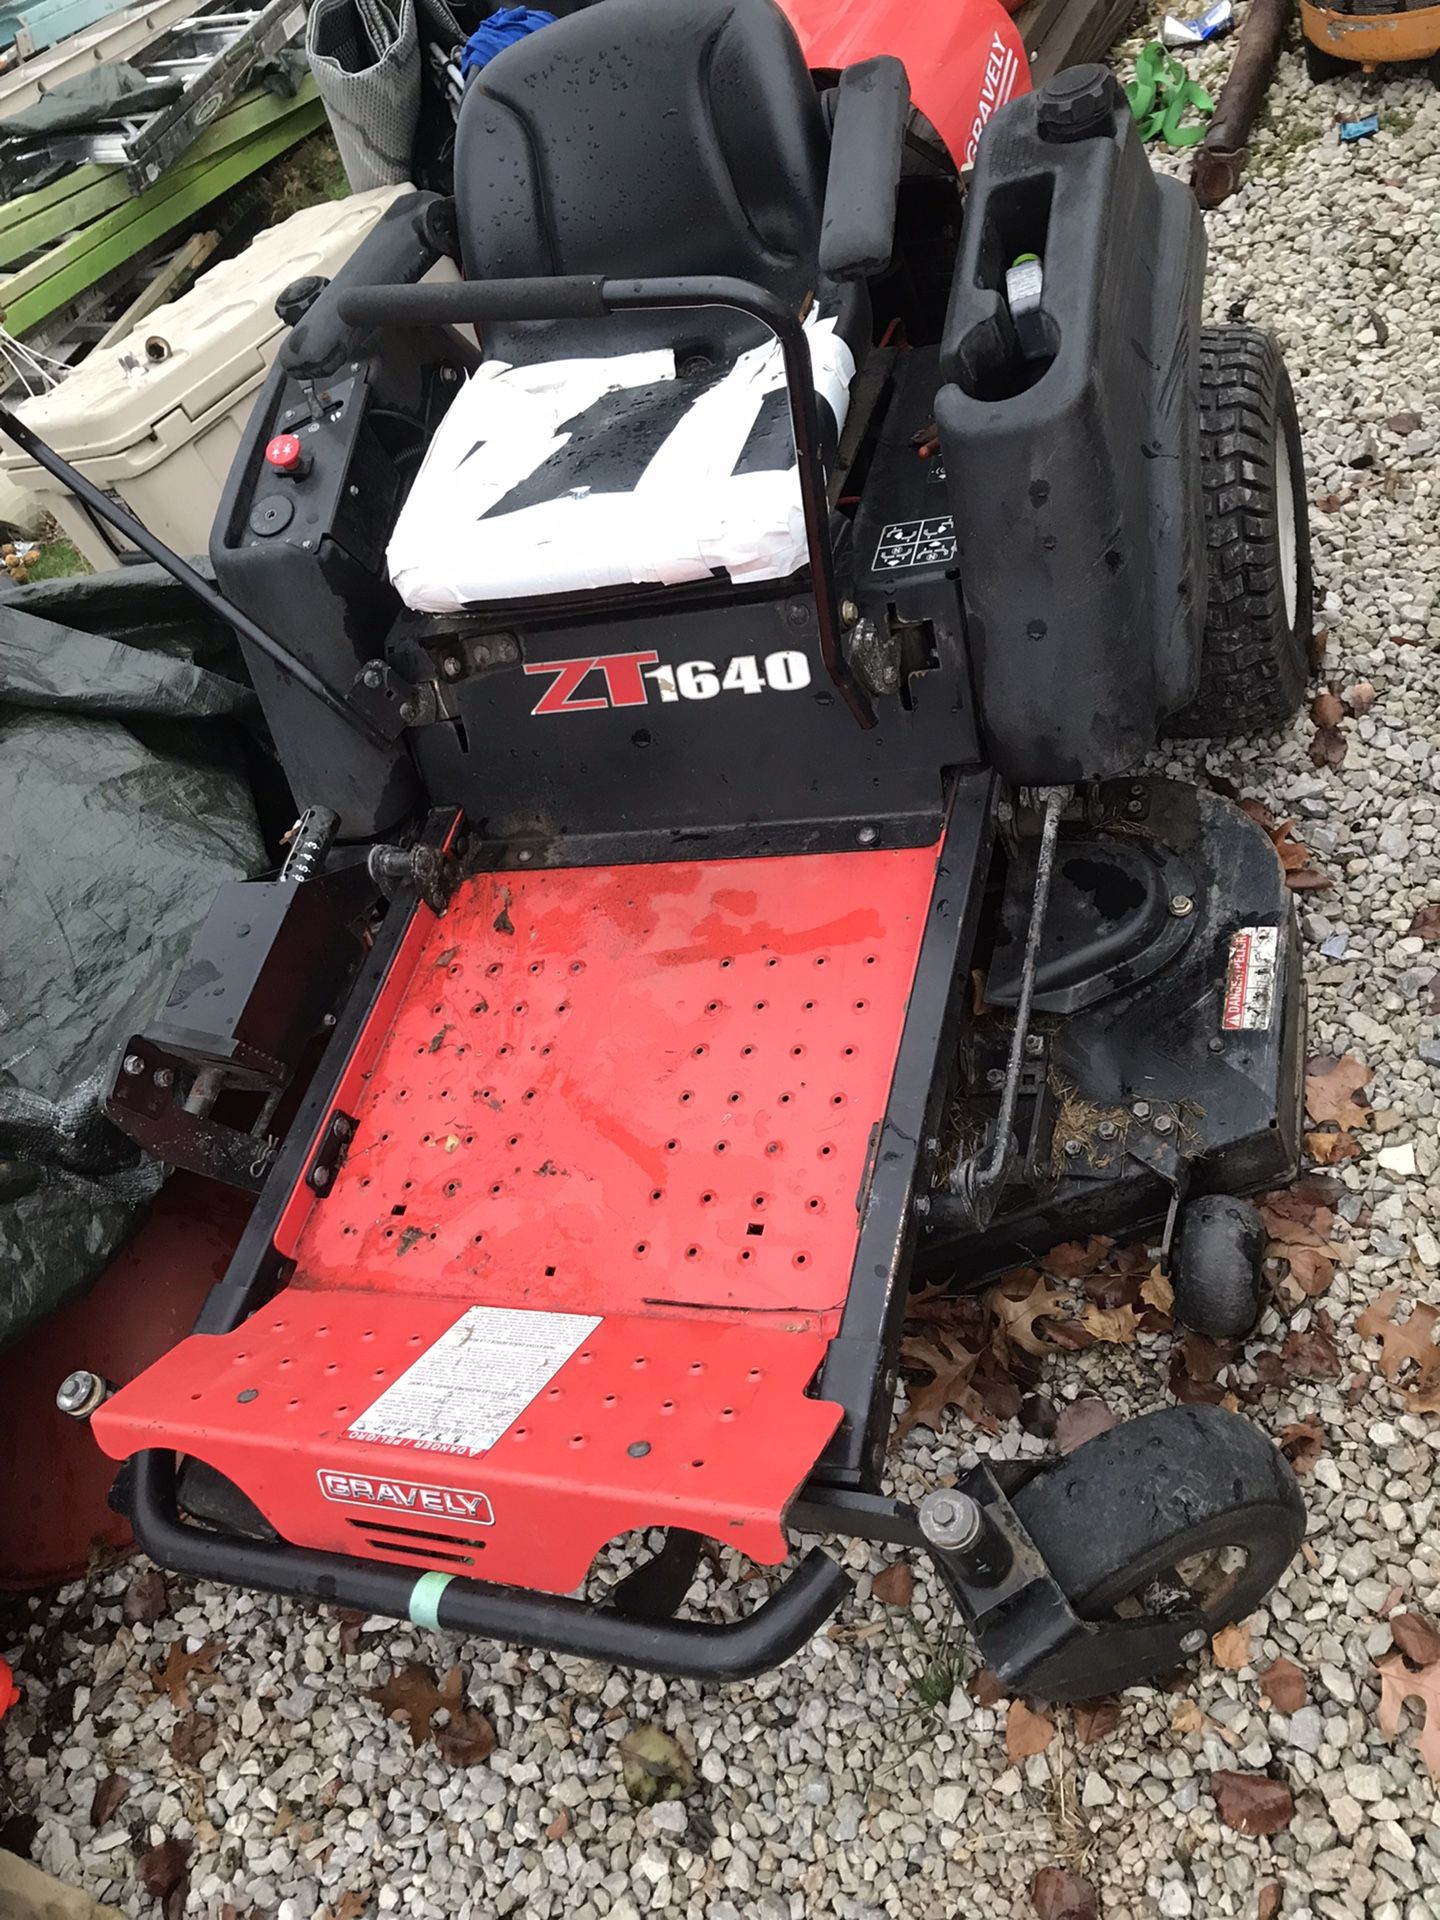 Zt 1640 Gravely For A Tire Machine 